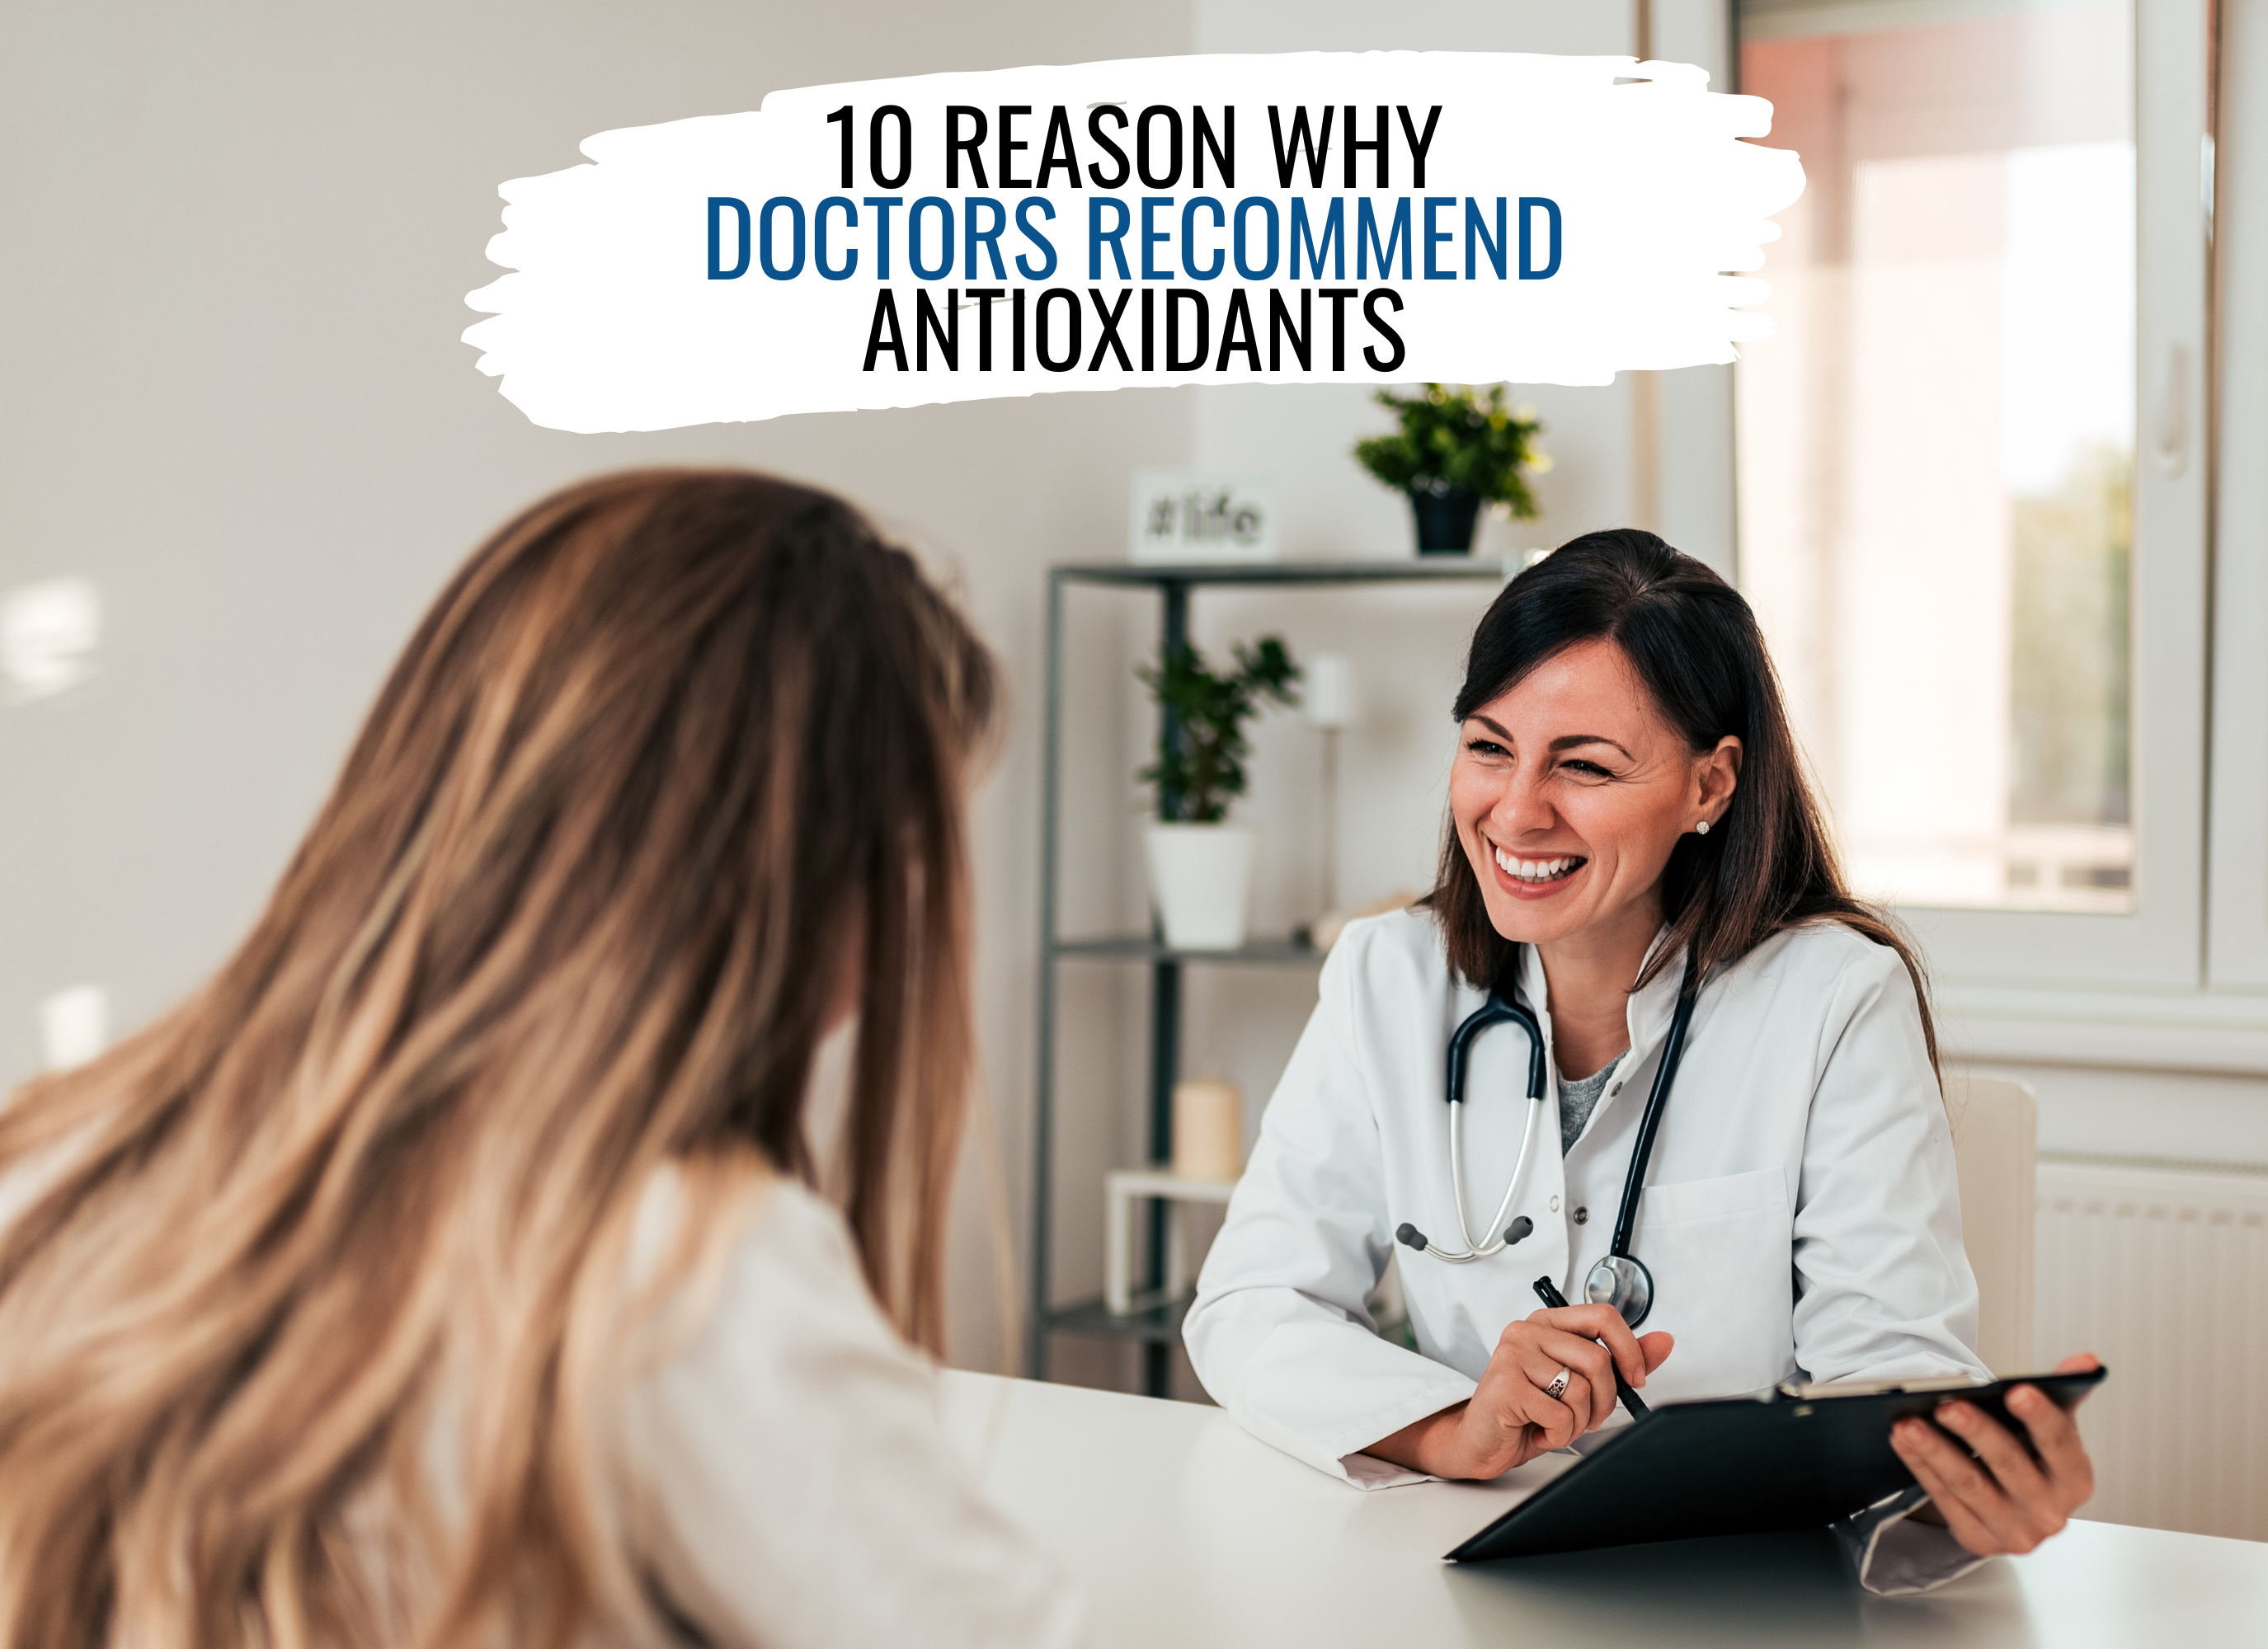 10 Reasons Why Doctors Recommend Antioxidants